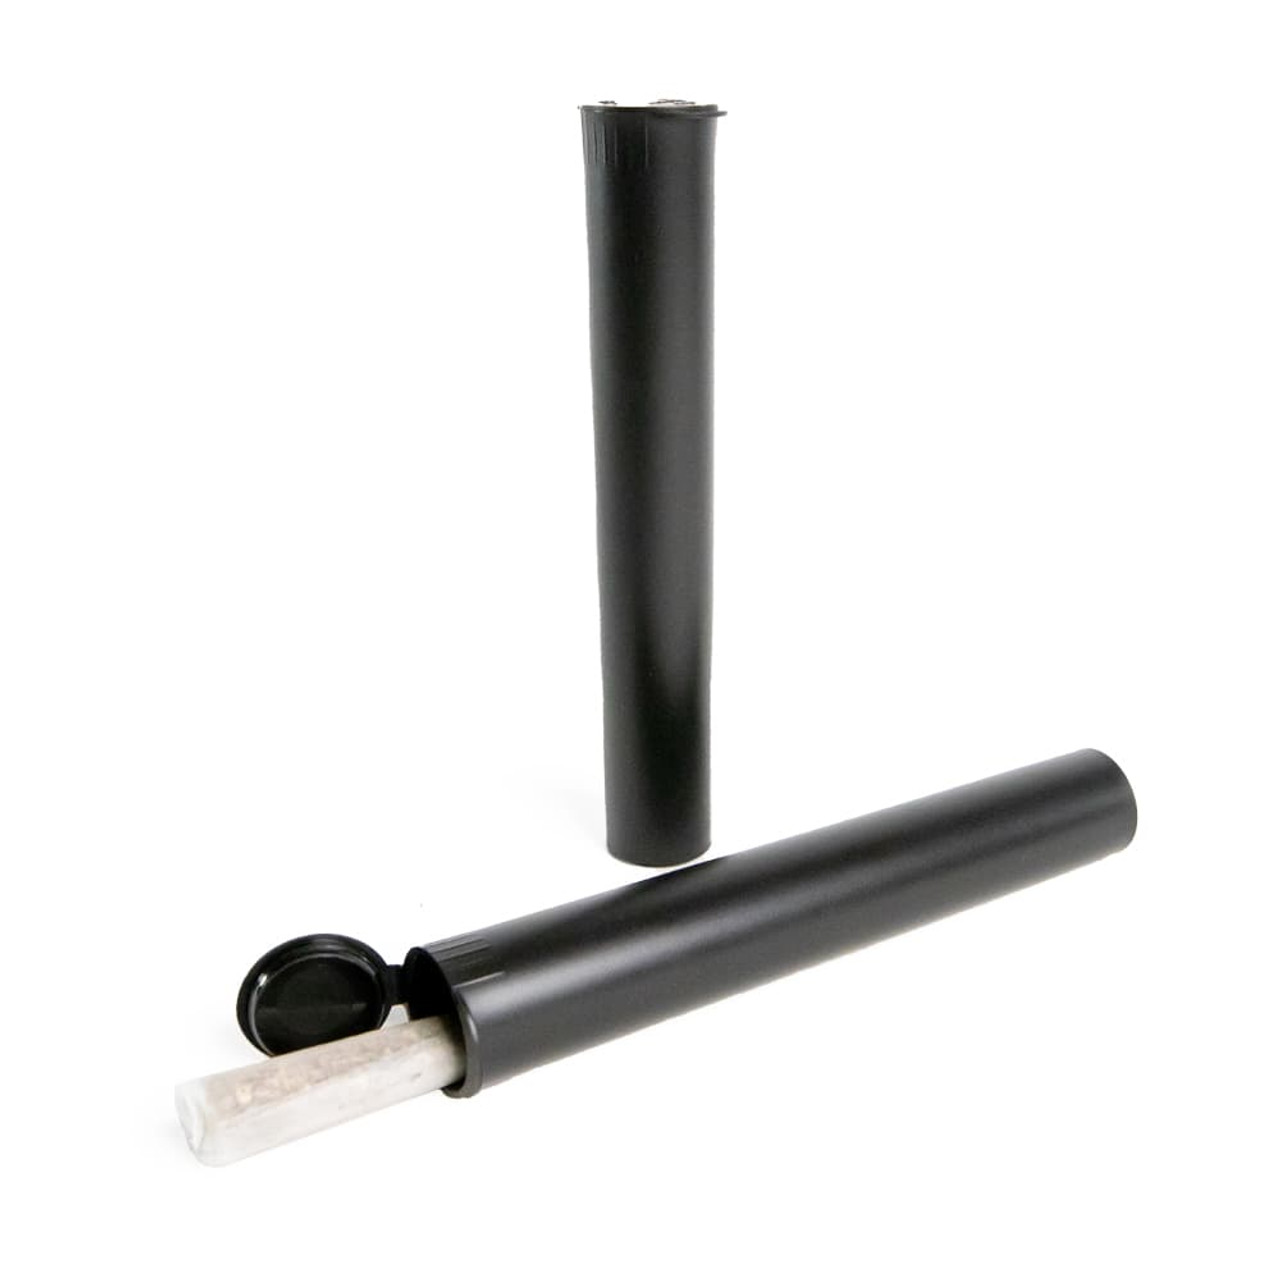 W Gallery 100 Black 116mm Tubes Pop Top Joint is Open Smell-Proof Pre-Roll  Blunt J Oil-Cartridge BPA-Free Plastic Container Holder Vial fits RAW Cones  110mm 109mm King Lean 98 Special 120mm